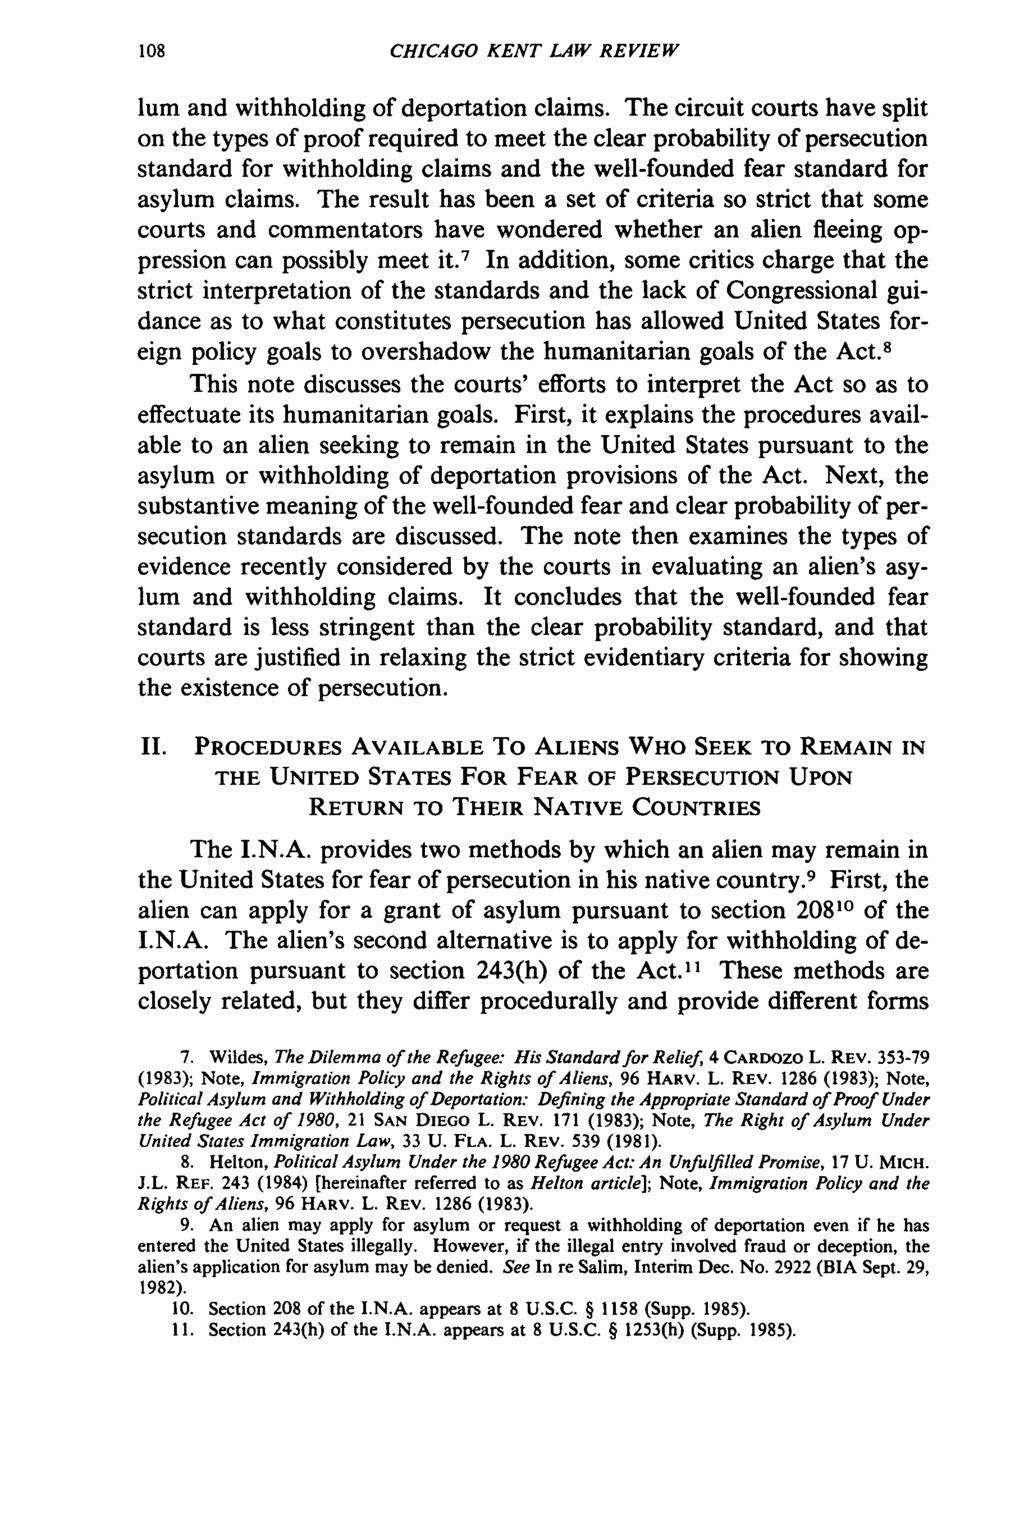 CHICAGO KENT LAW REVIEW lum and withholding of deportation claims.